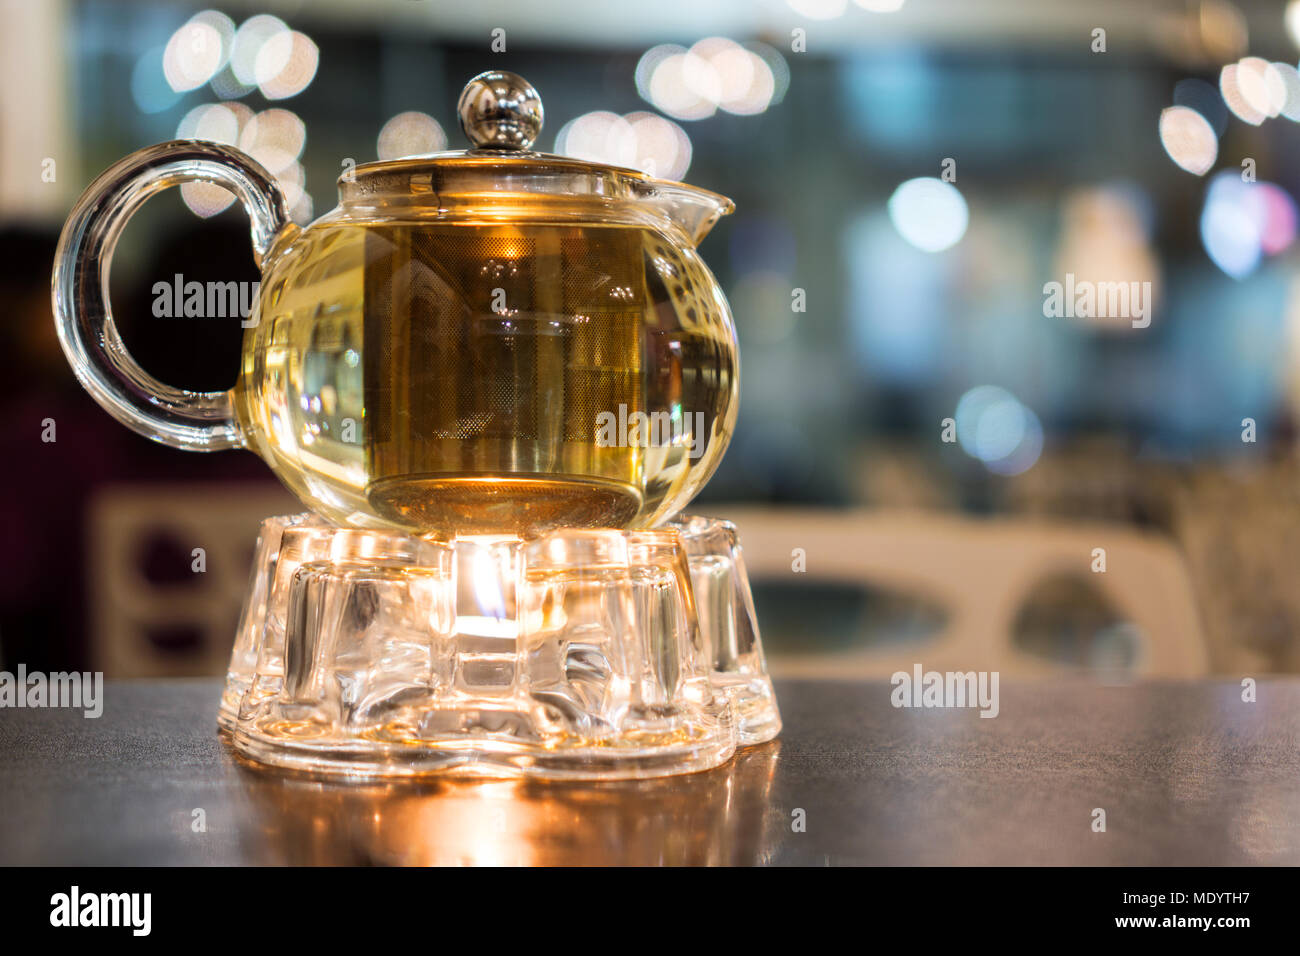 Hot teapot with warmer on wood table Stock Photo